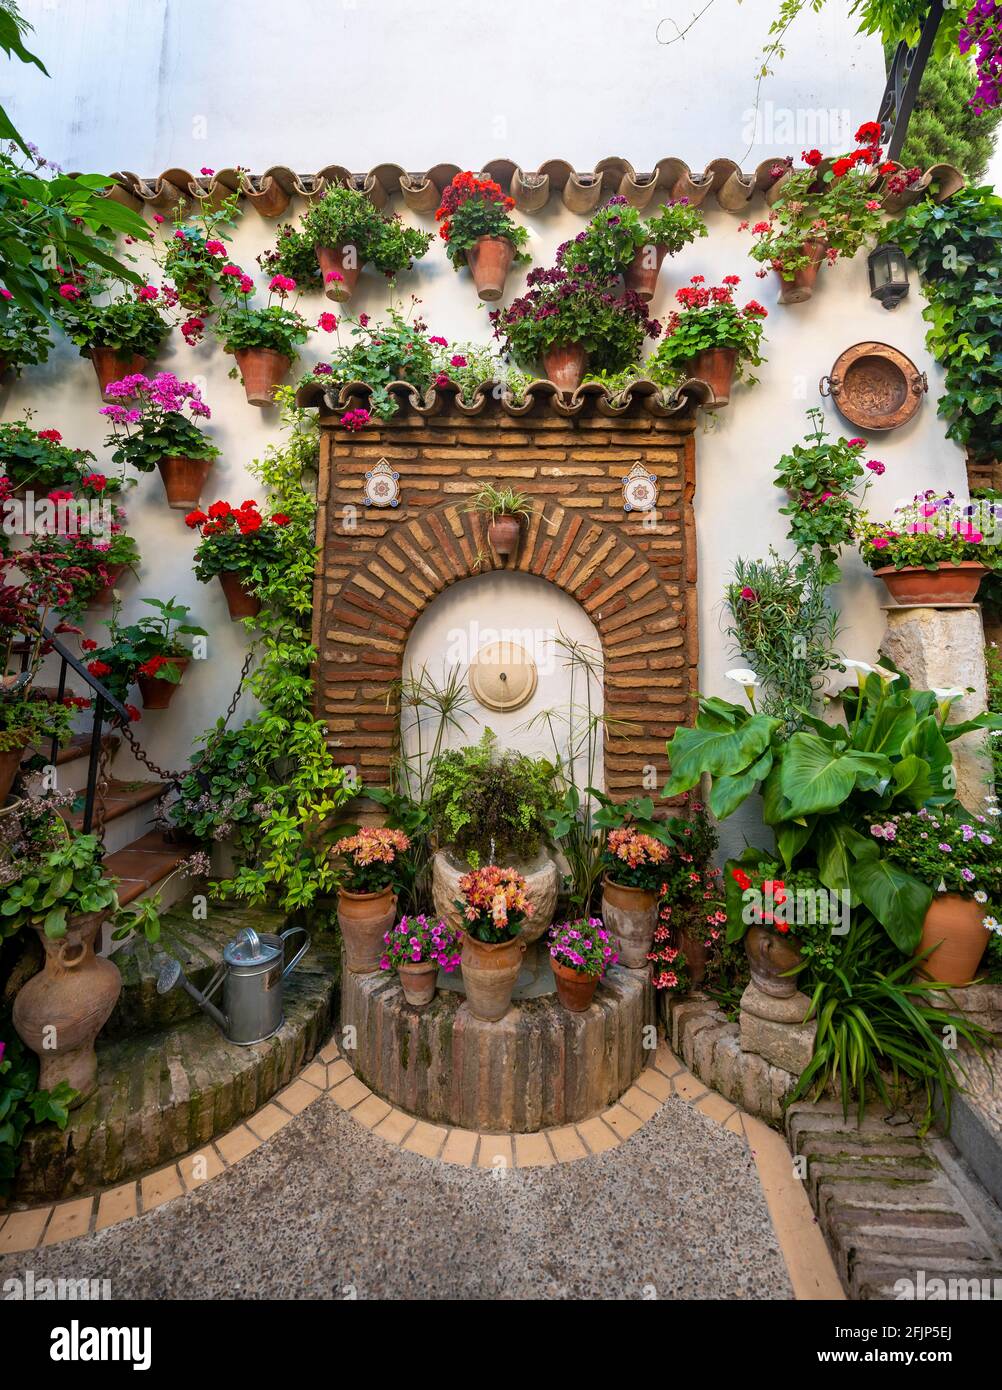 Fountain in the courtyard decorated with flowers, geraniums in flower pots on the house wall, Fiesta de los Patios, Cordoba, Andalusia, Spain Stock Photo